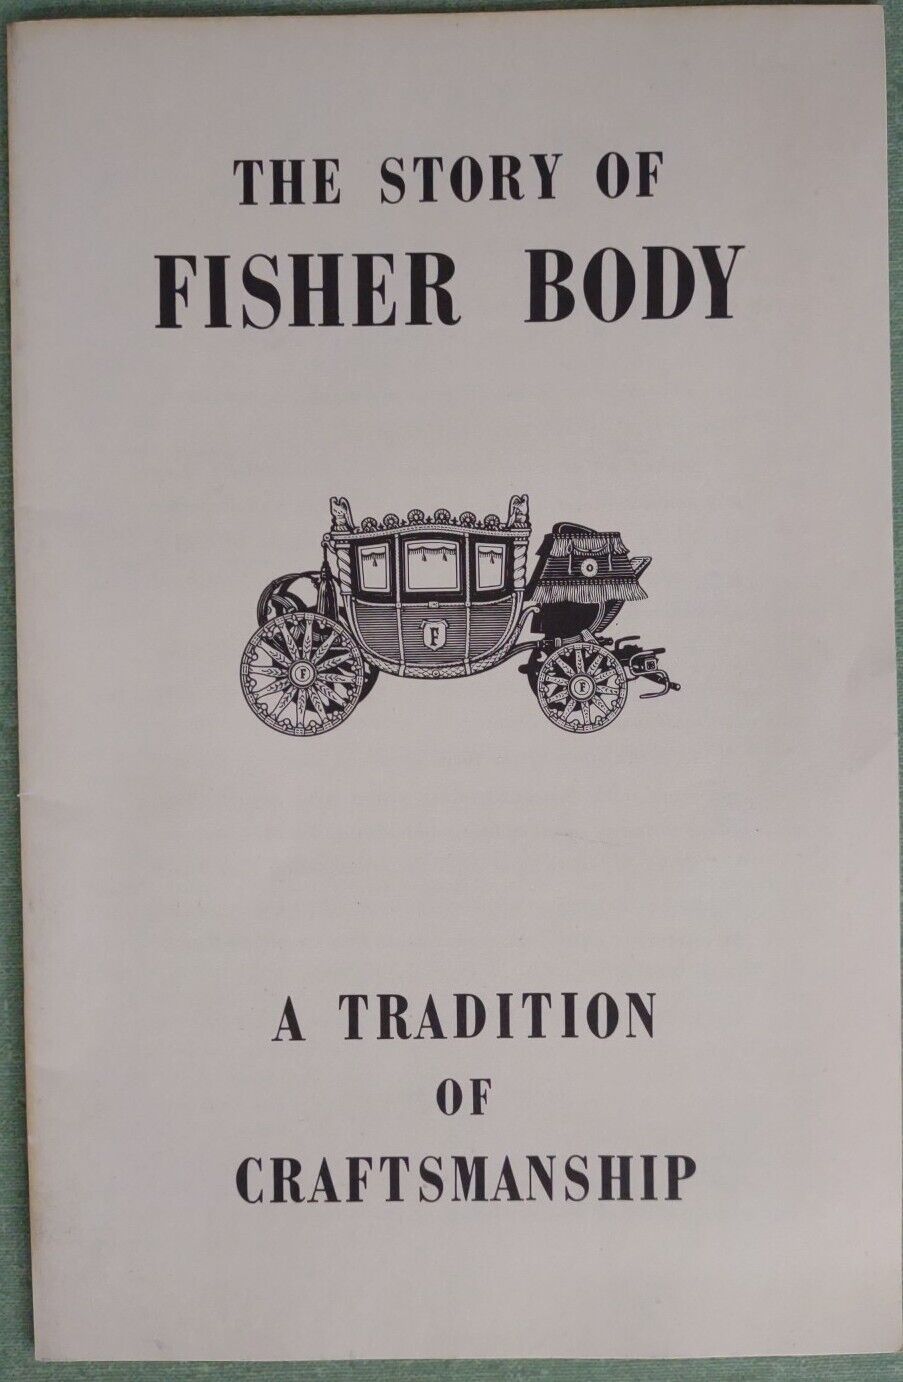 1953 The Story of Fisher Body Brochure